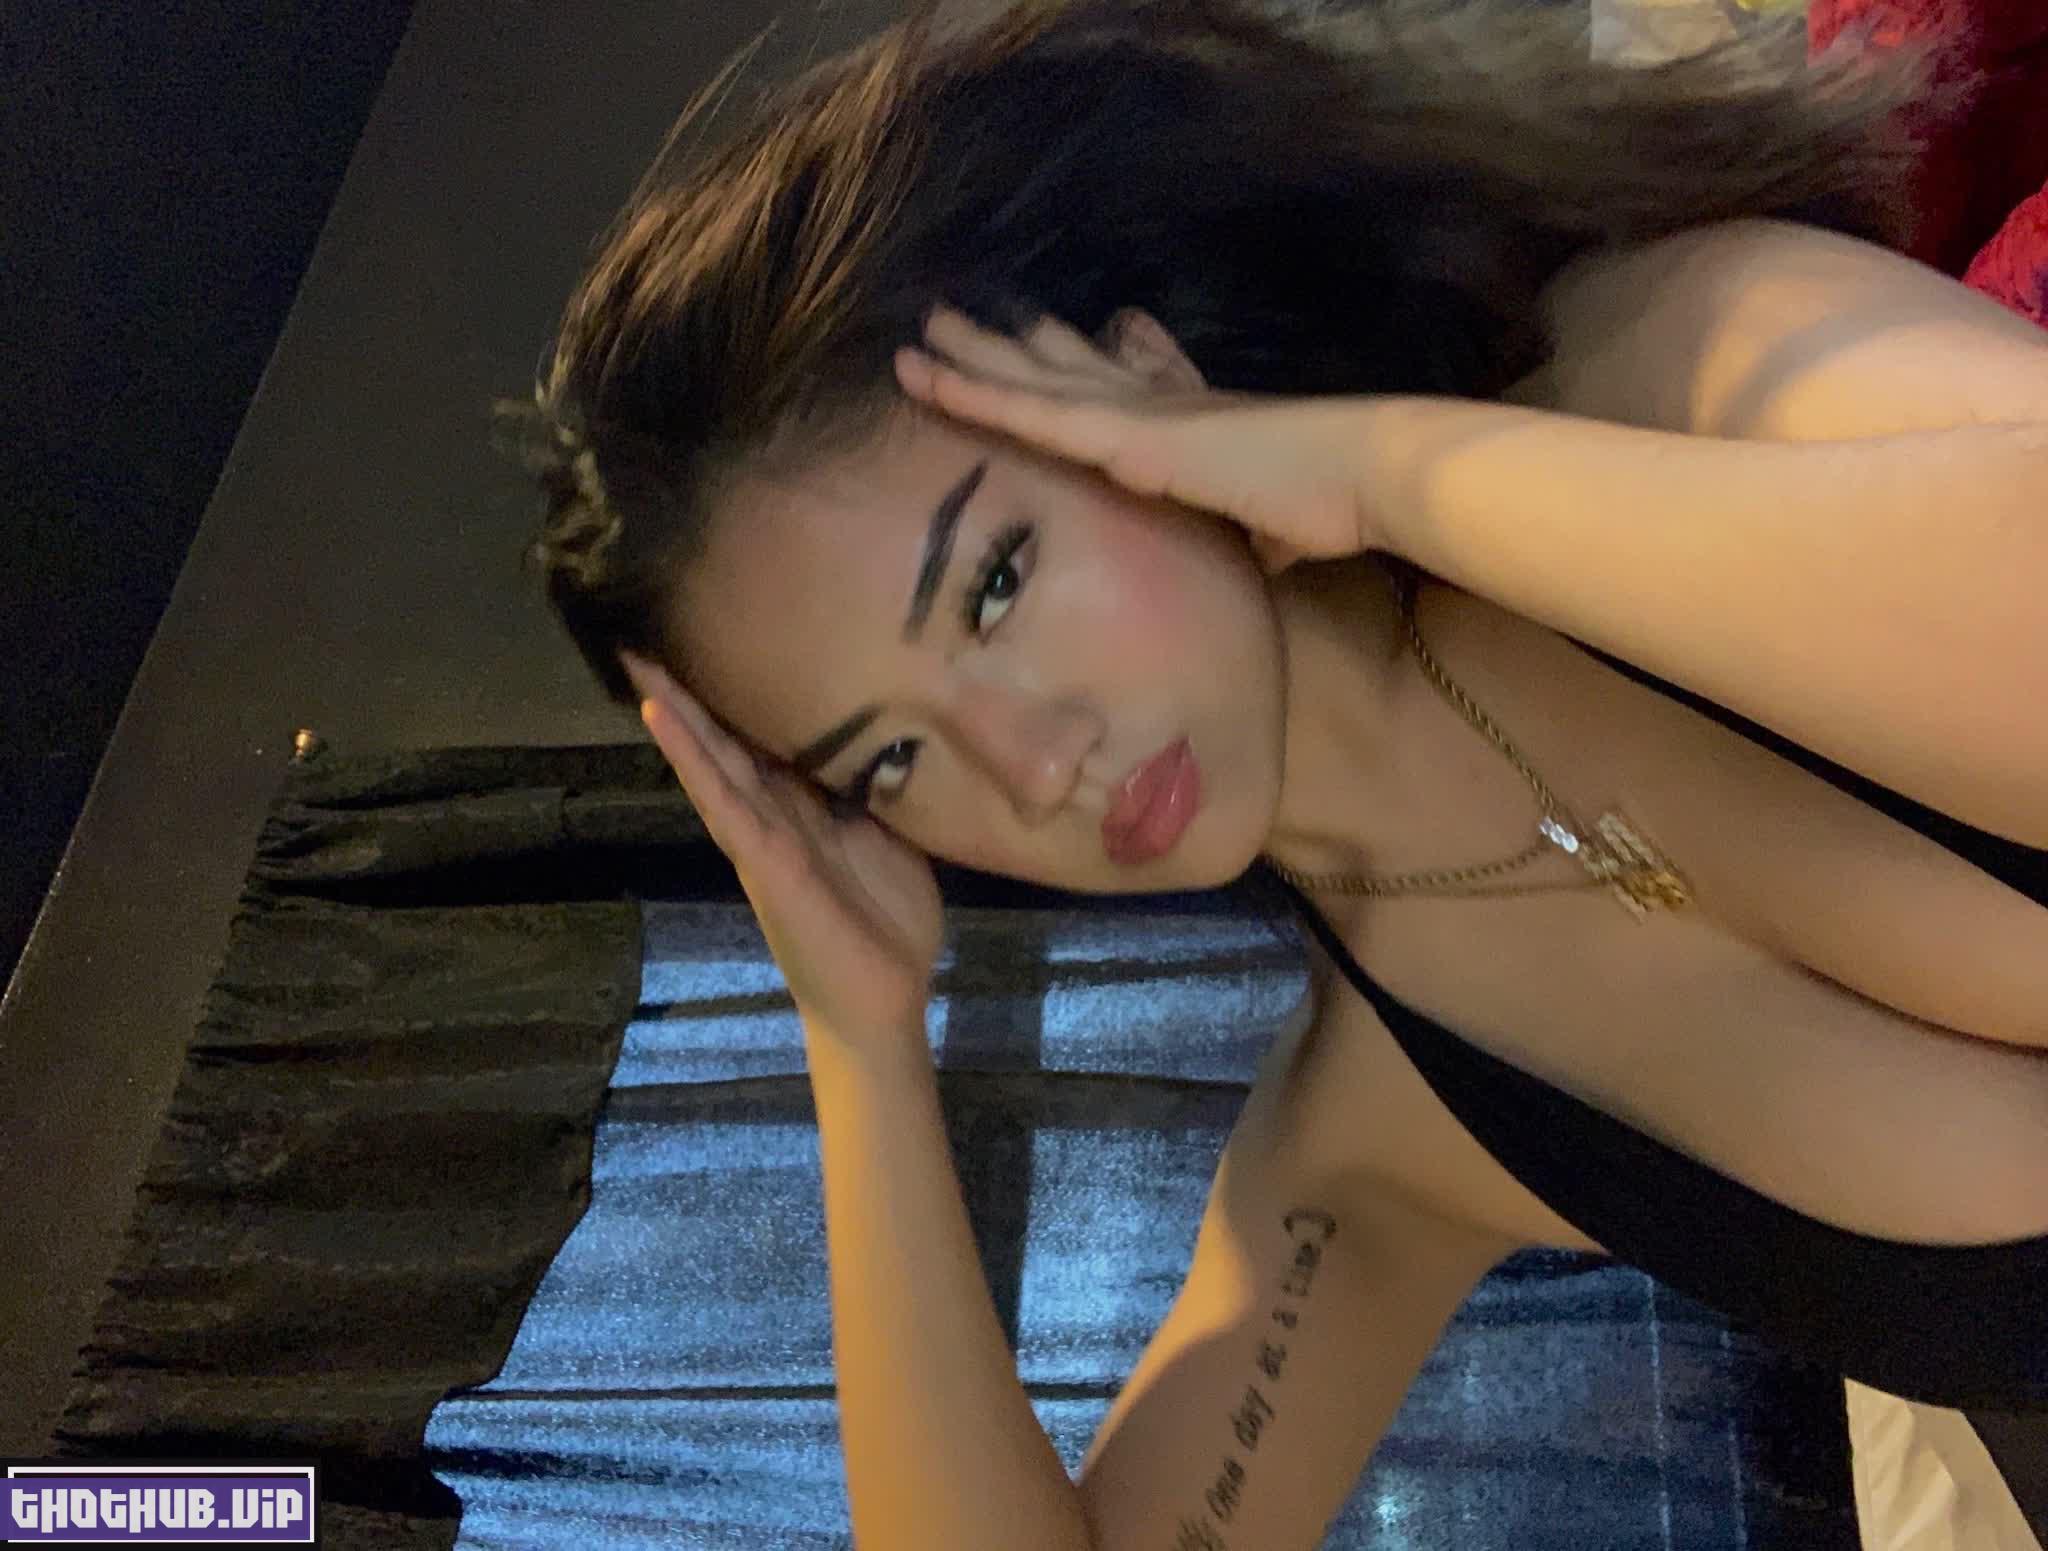 1701662827 185 Callmecupcakes %E2%80%93 Busty Asian Onlyfans Sextapes Nudes